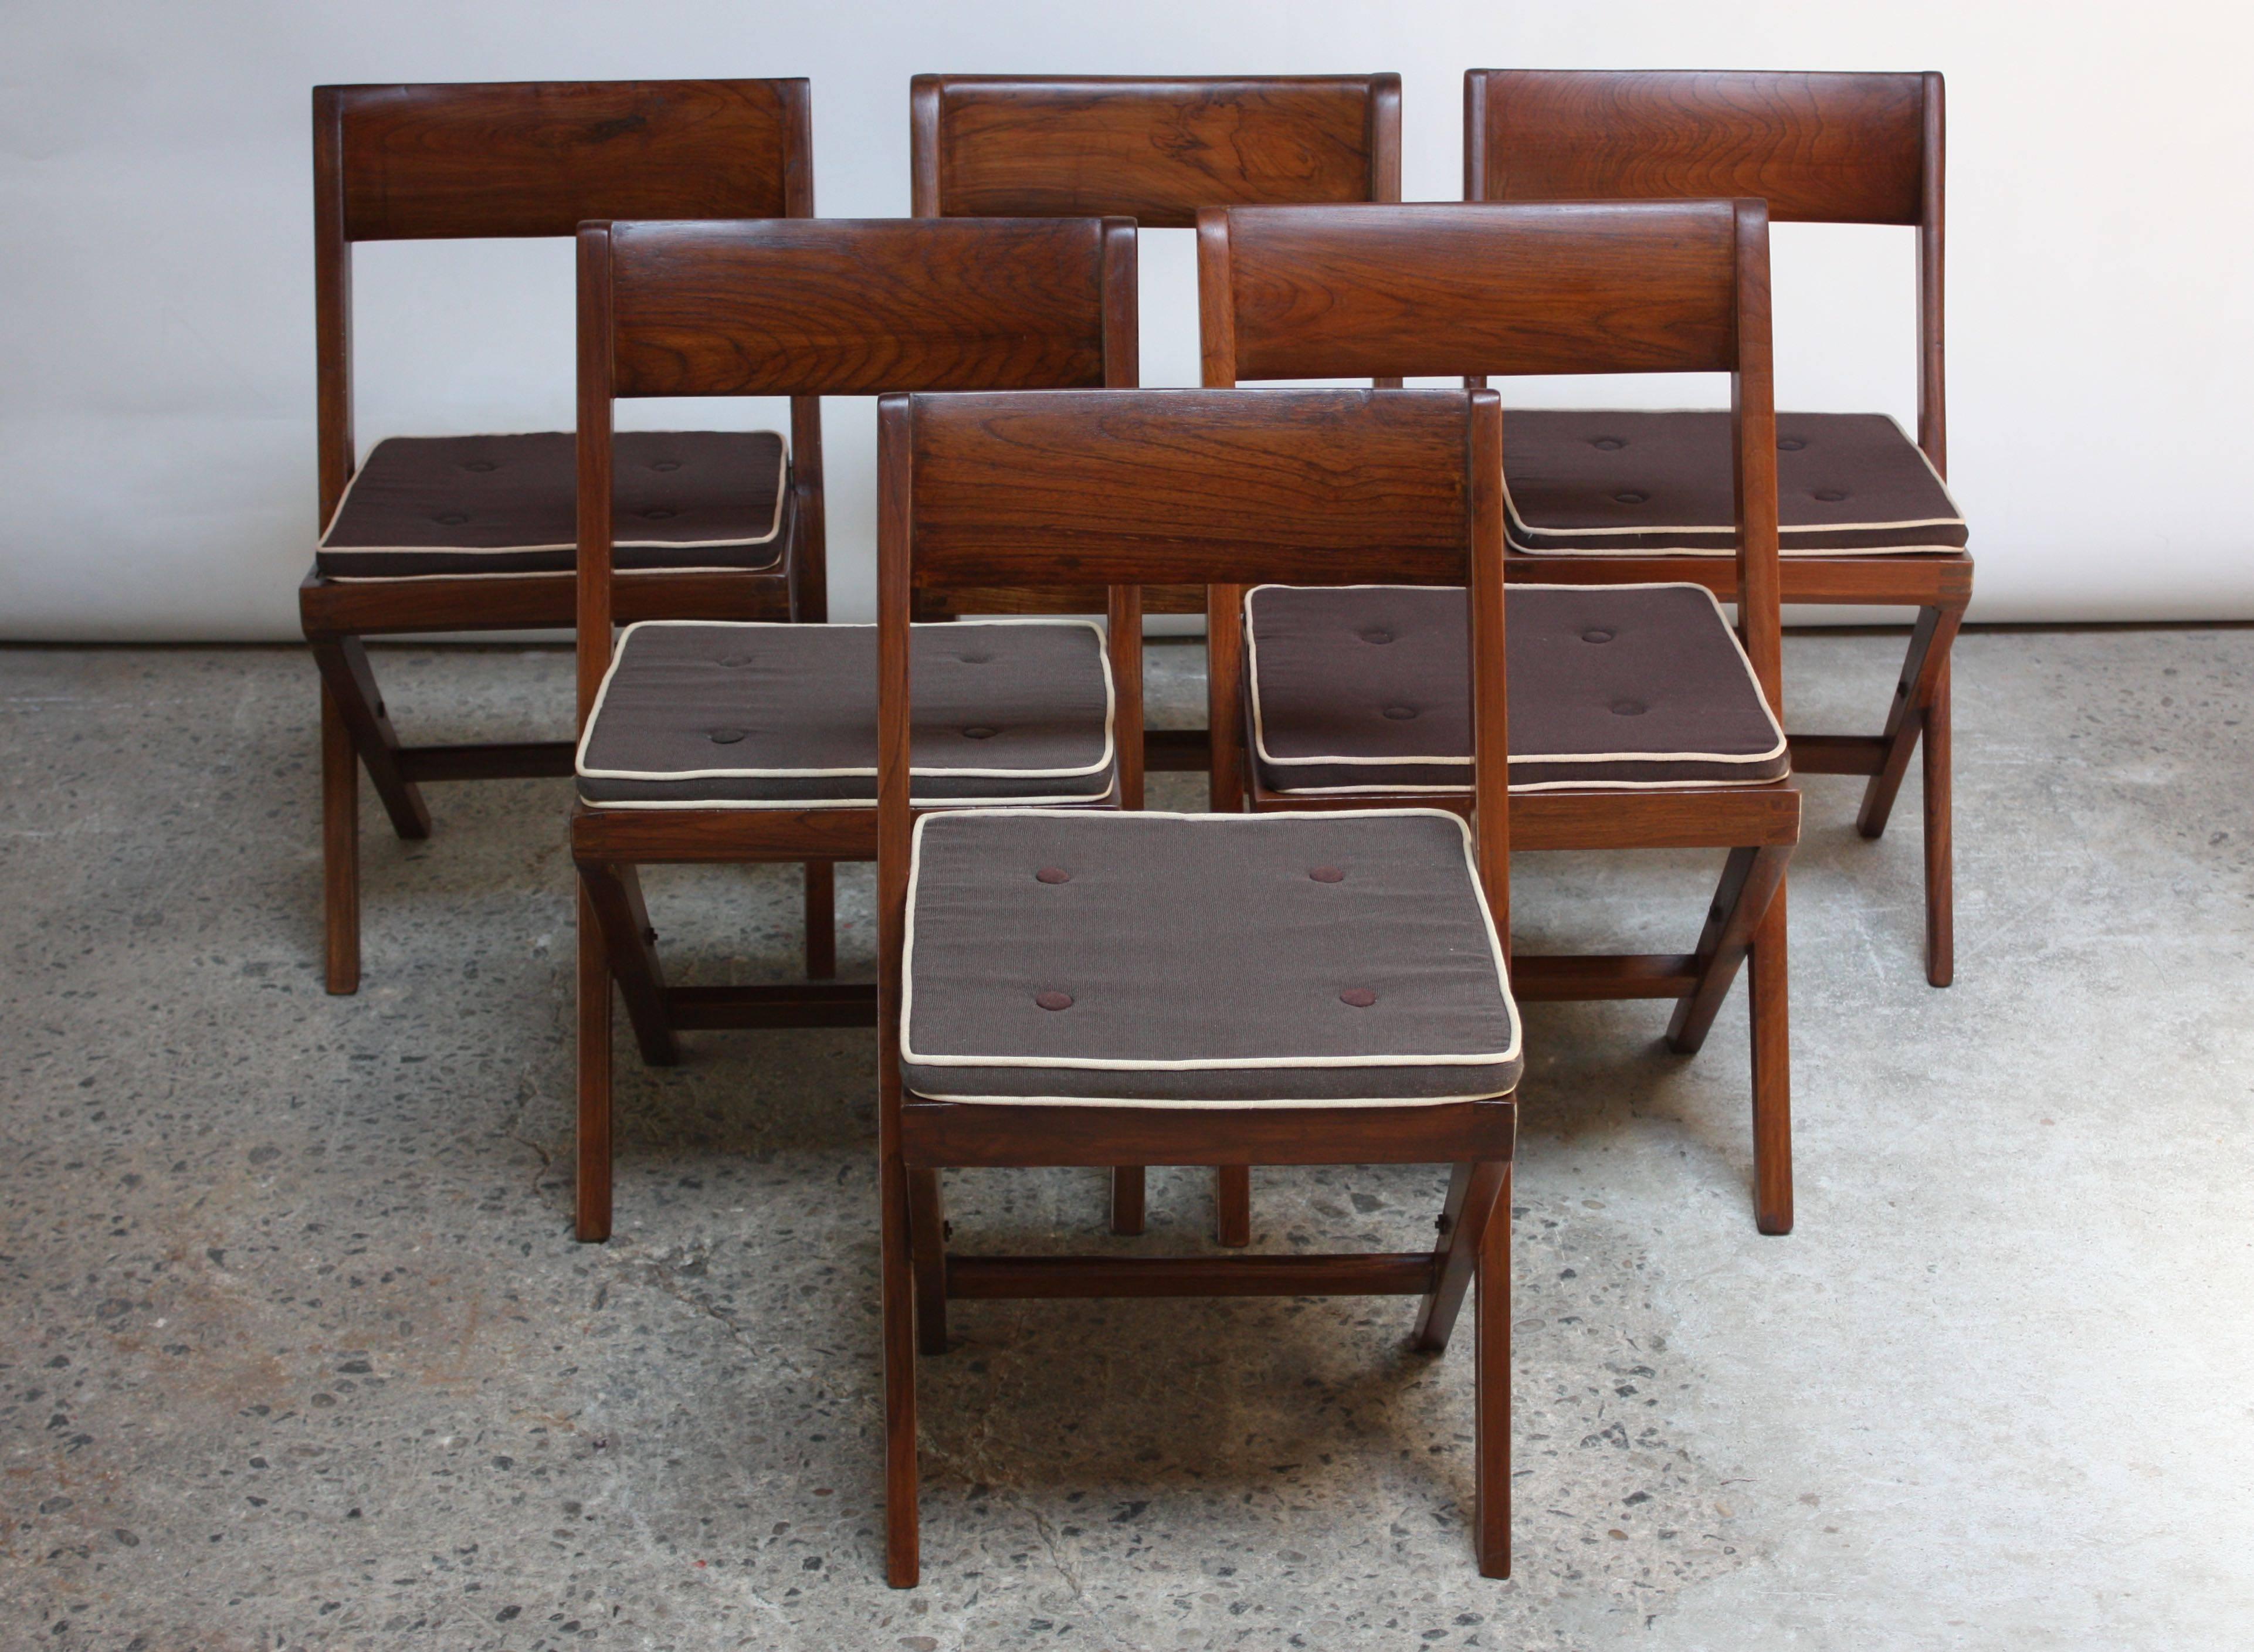 These Pierre Jeanneret library chairs (model PJ-SI-51-A) were originally designed for the University of Punjab's central library in Chandigarh in 1959. The frames are solid teak with braided cane-work seats. There are solid 'banner' style backrests